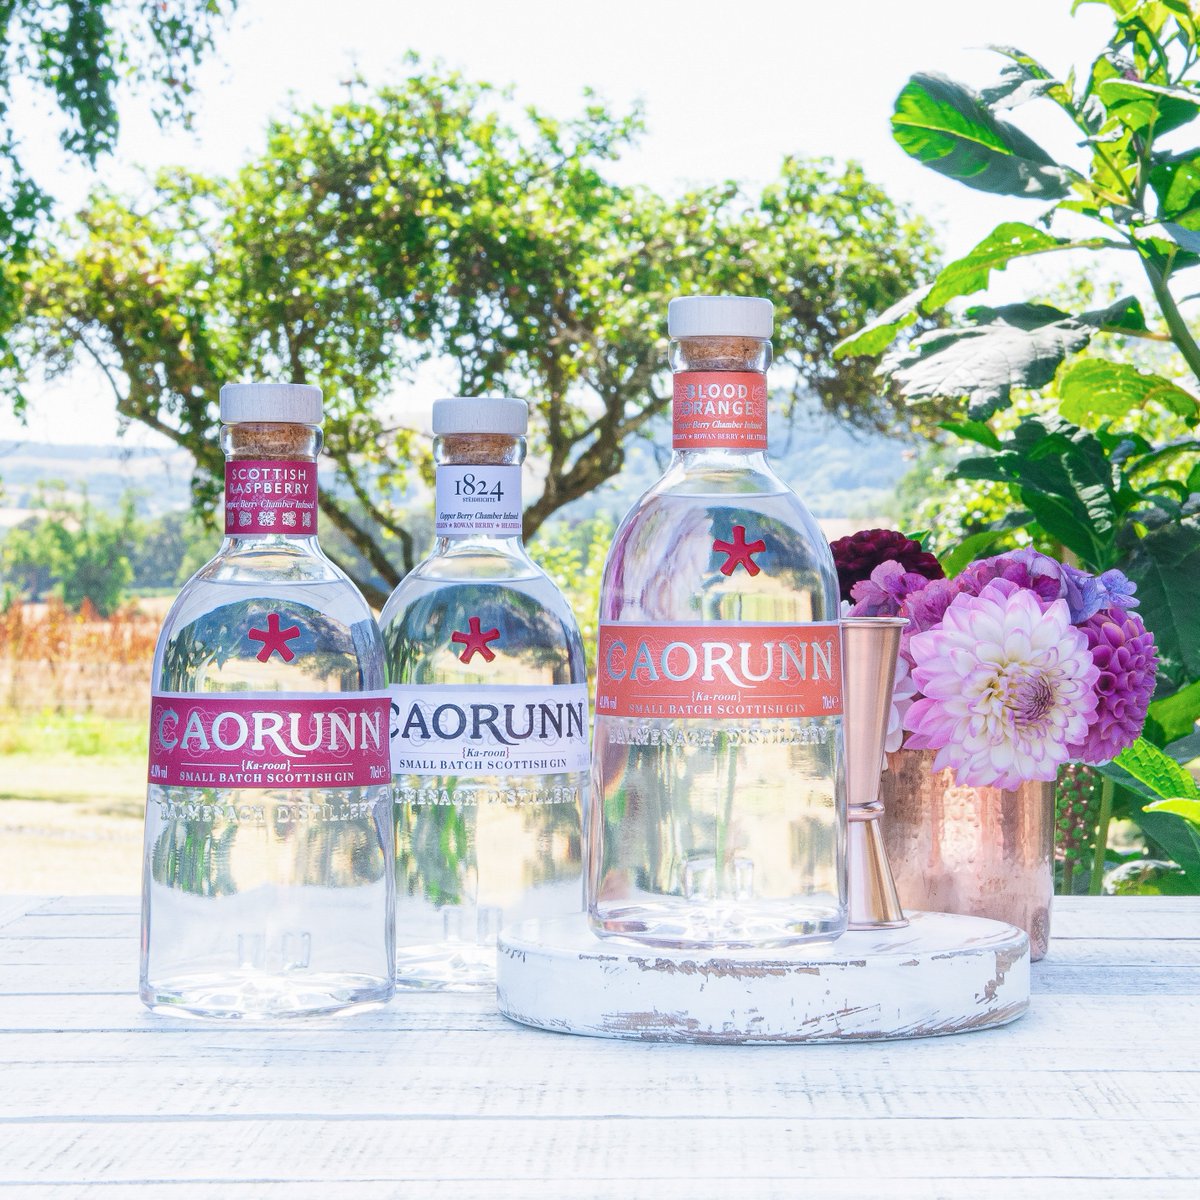 Tonic-ing and toasting to all Mothers and Mother figures today - love from Caorunn 🥂💐 It doesn't take a Gin Genius to drink responsibly. #GinGenius #Caorunn #SmallBatchGin #GandT